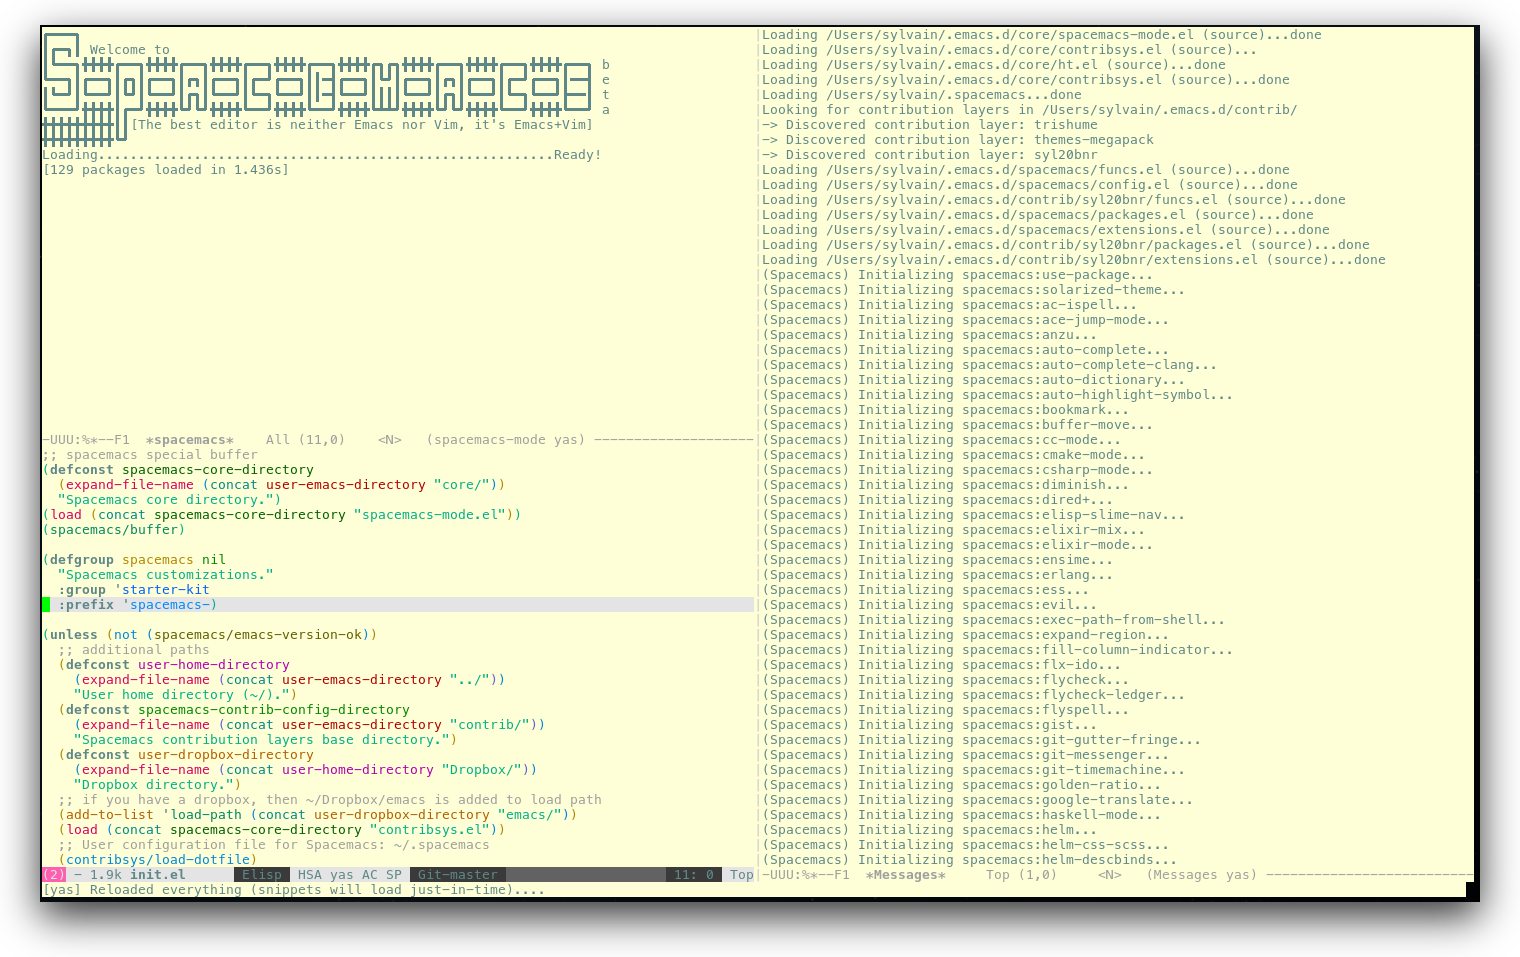 /TakeV/spacemacs/media/commit/bc197a288cd5ca7736bee0bcb753ea2413c1fc11/doc/img/spacemacs-urxvt.png